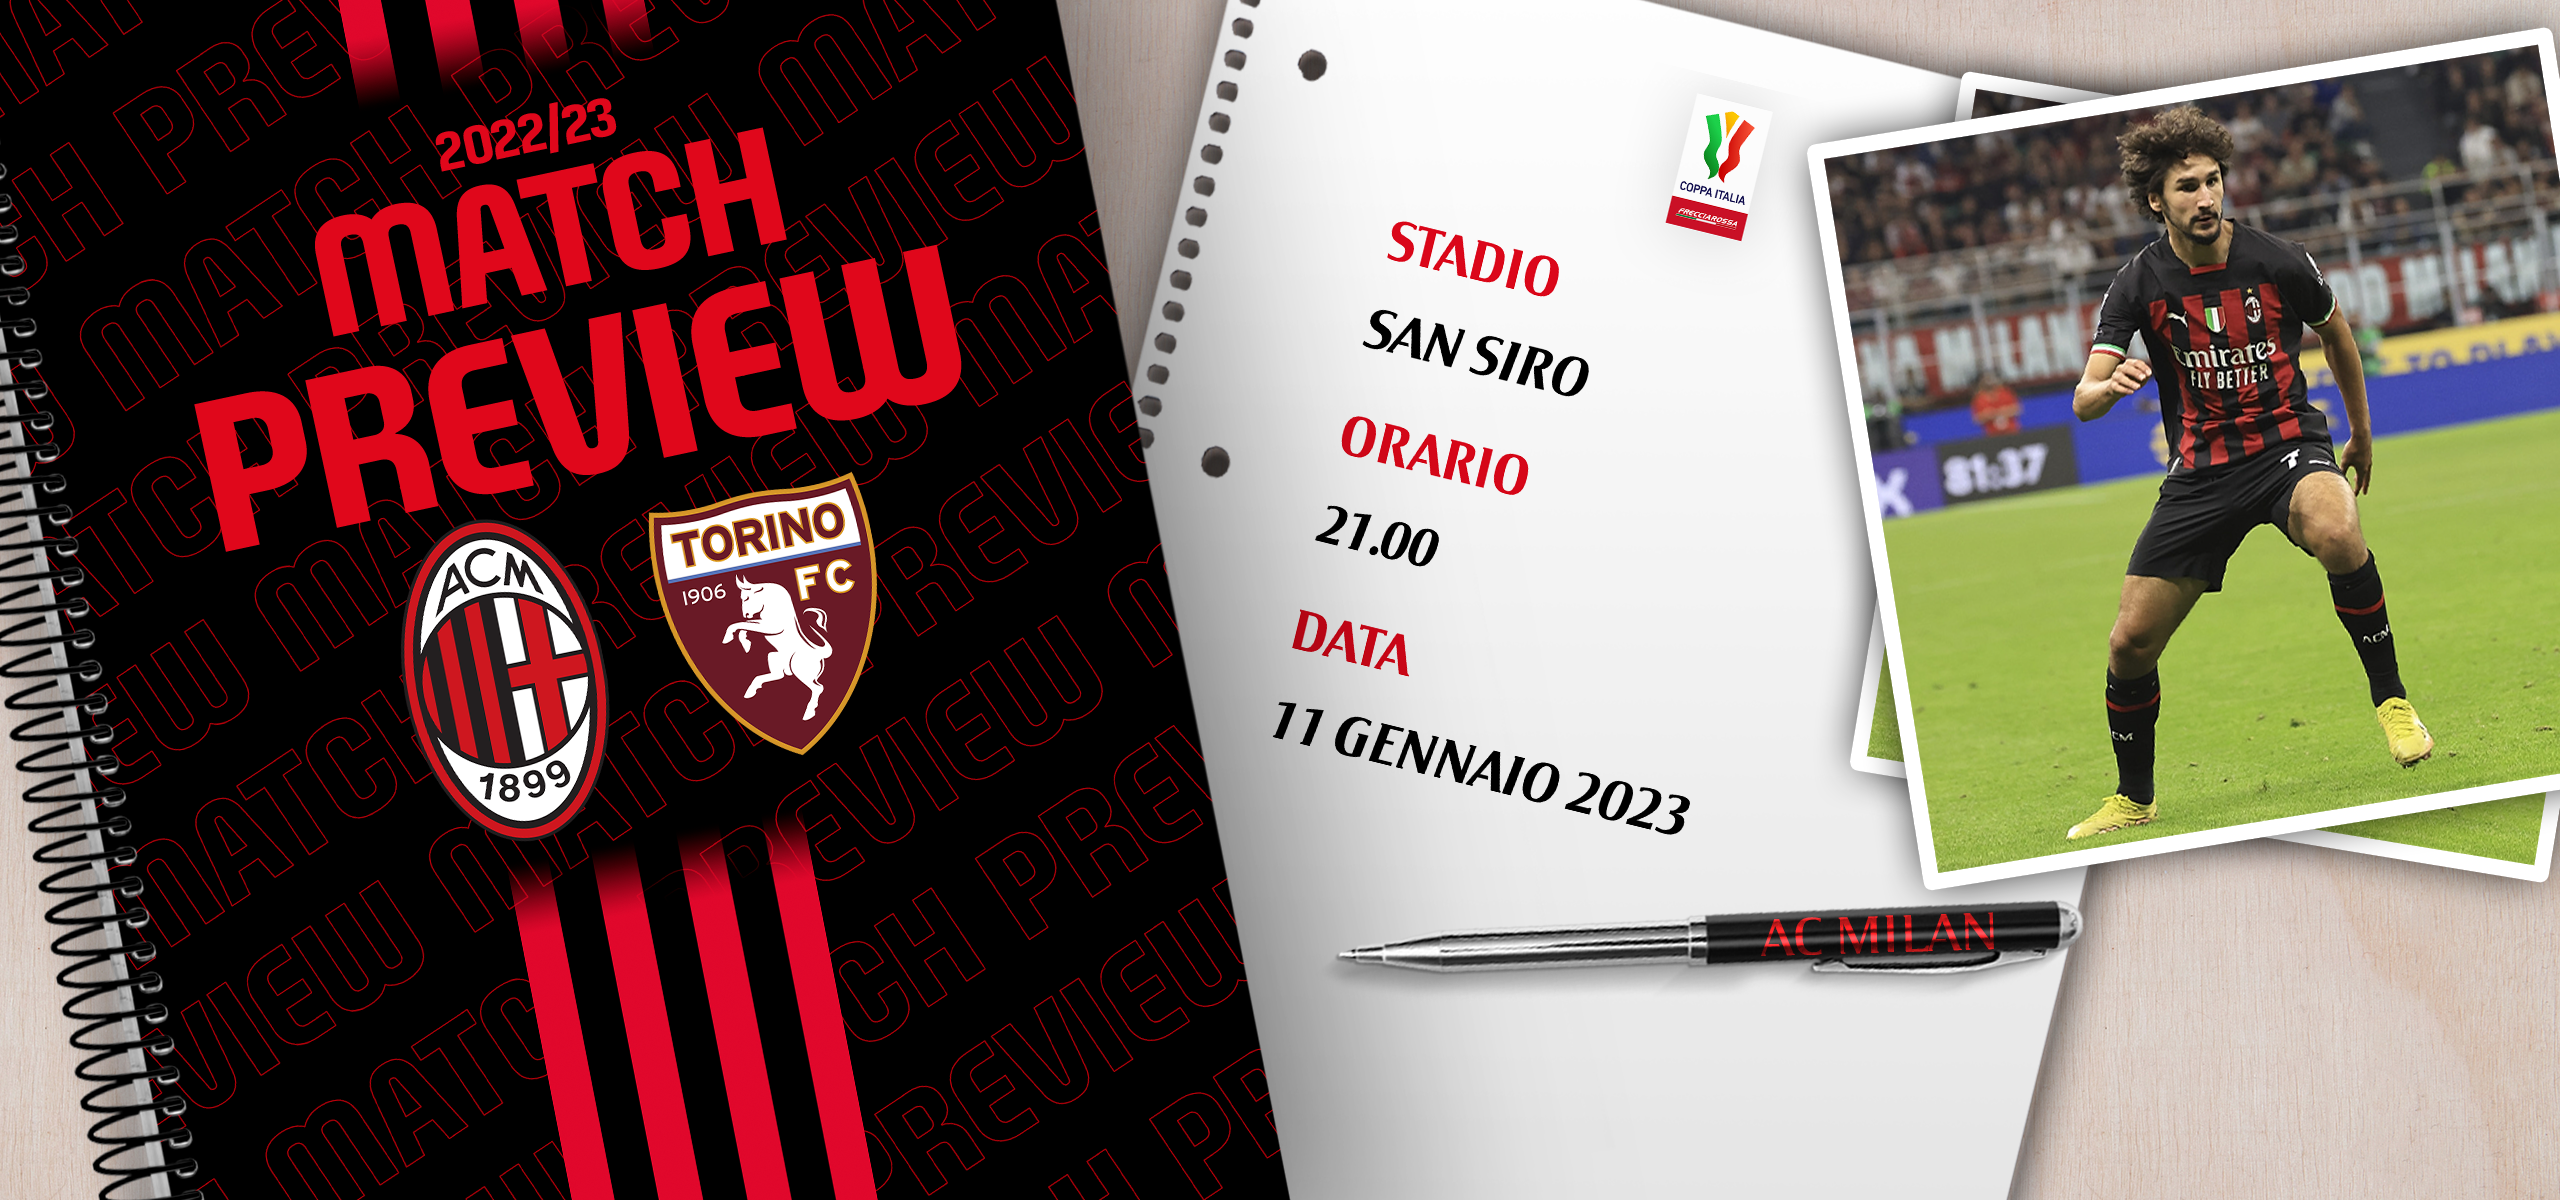 How to watch Torino vs. Genoa: Live stream, TV channel, start time for  Sunday's Serie A game 